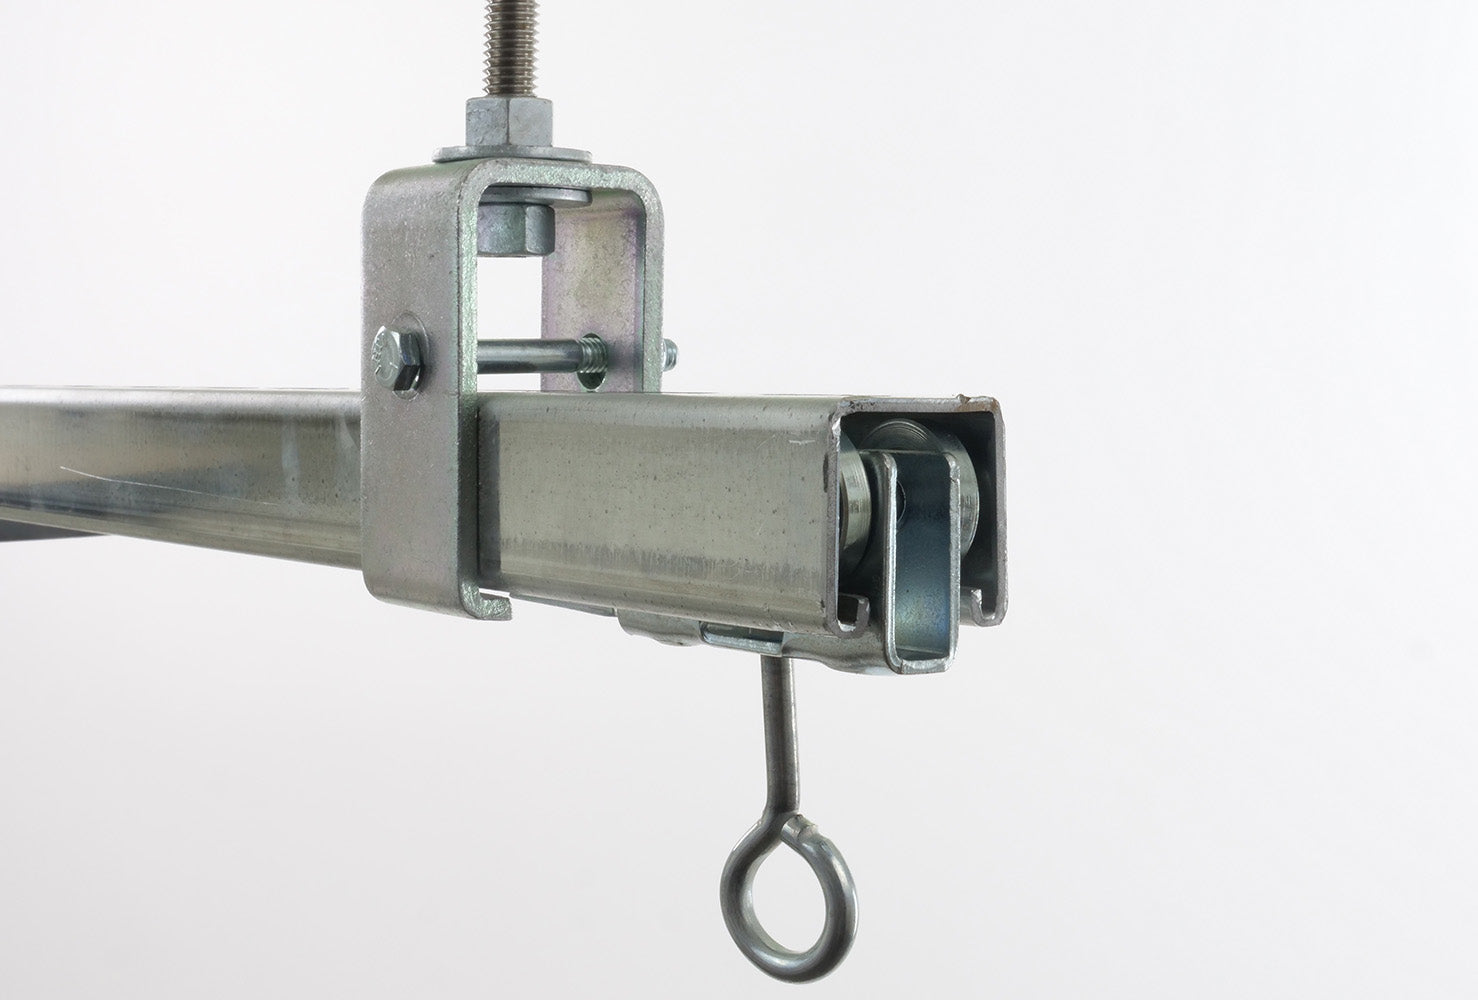 Unistrut Trolley System Offers Support to Varying Load Capacities